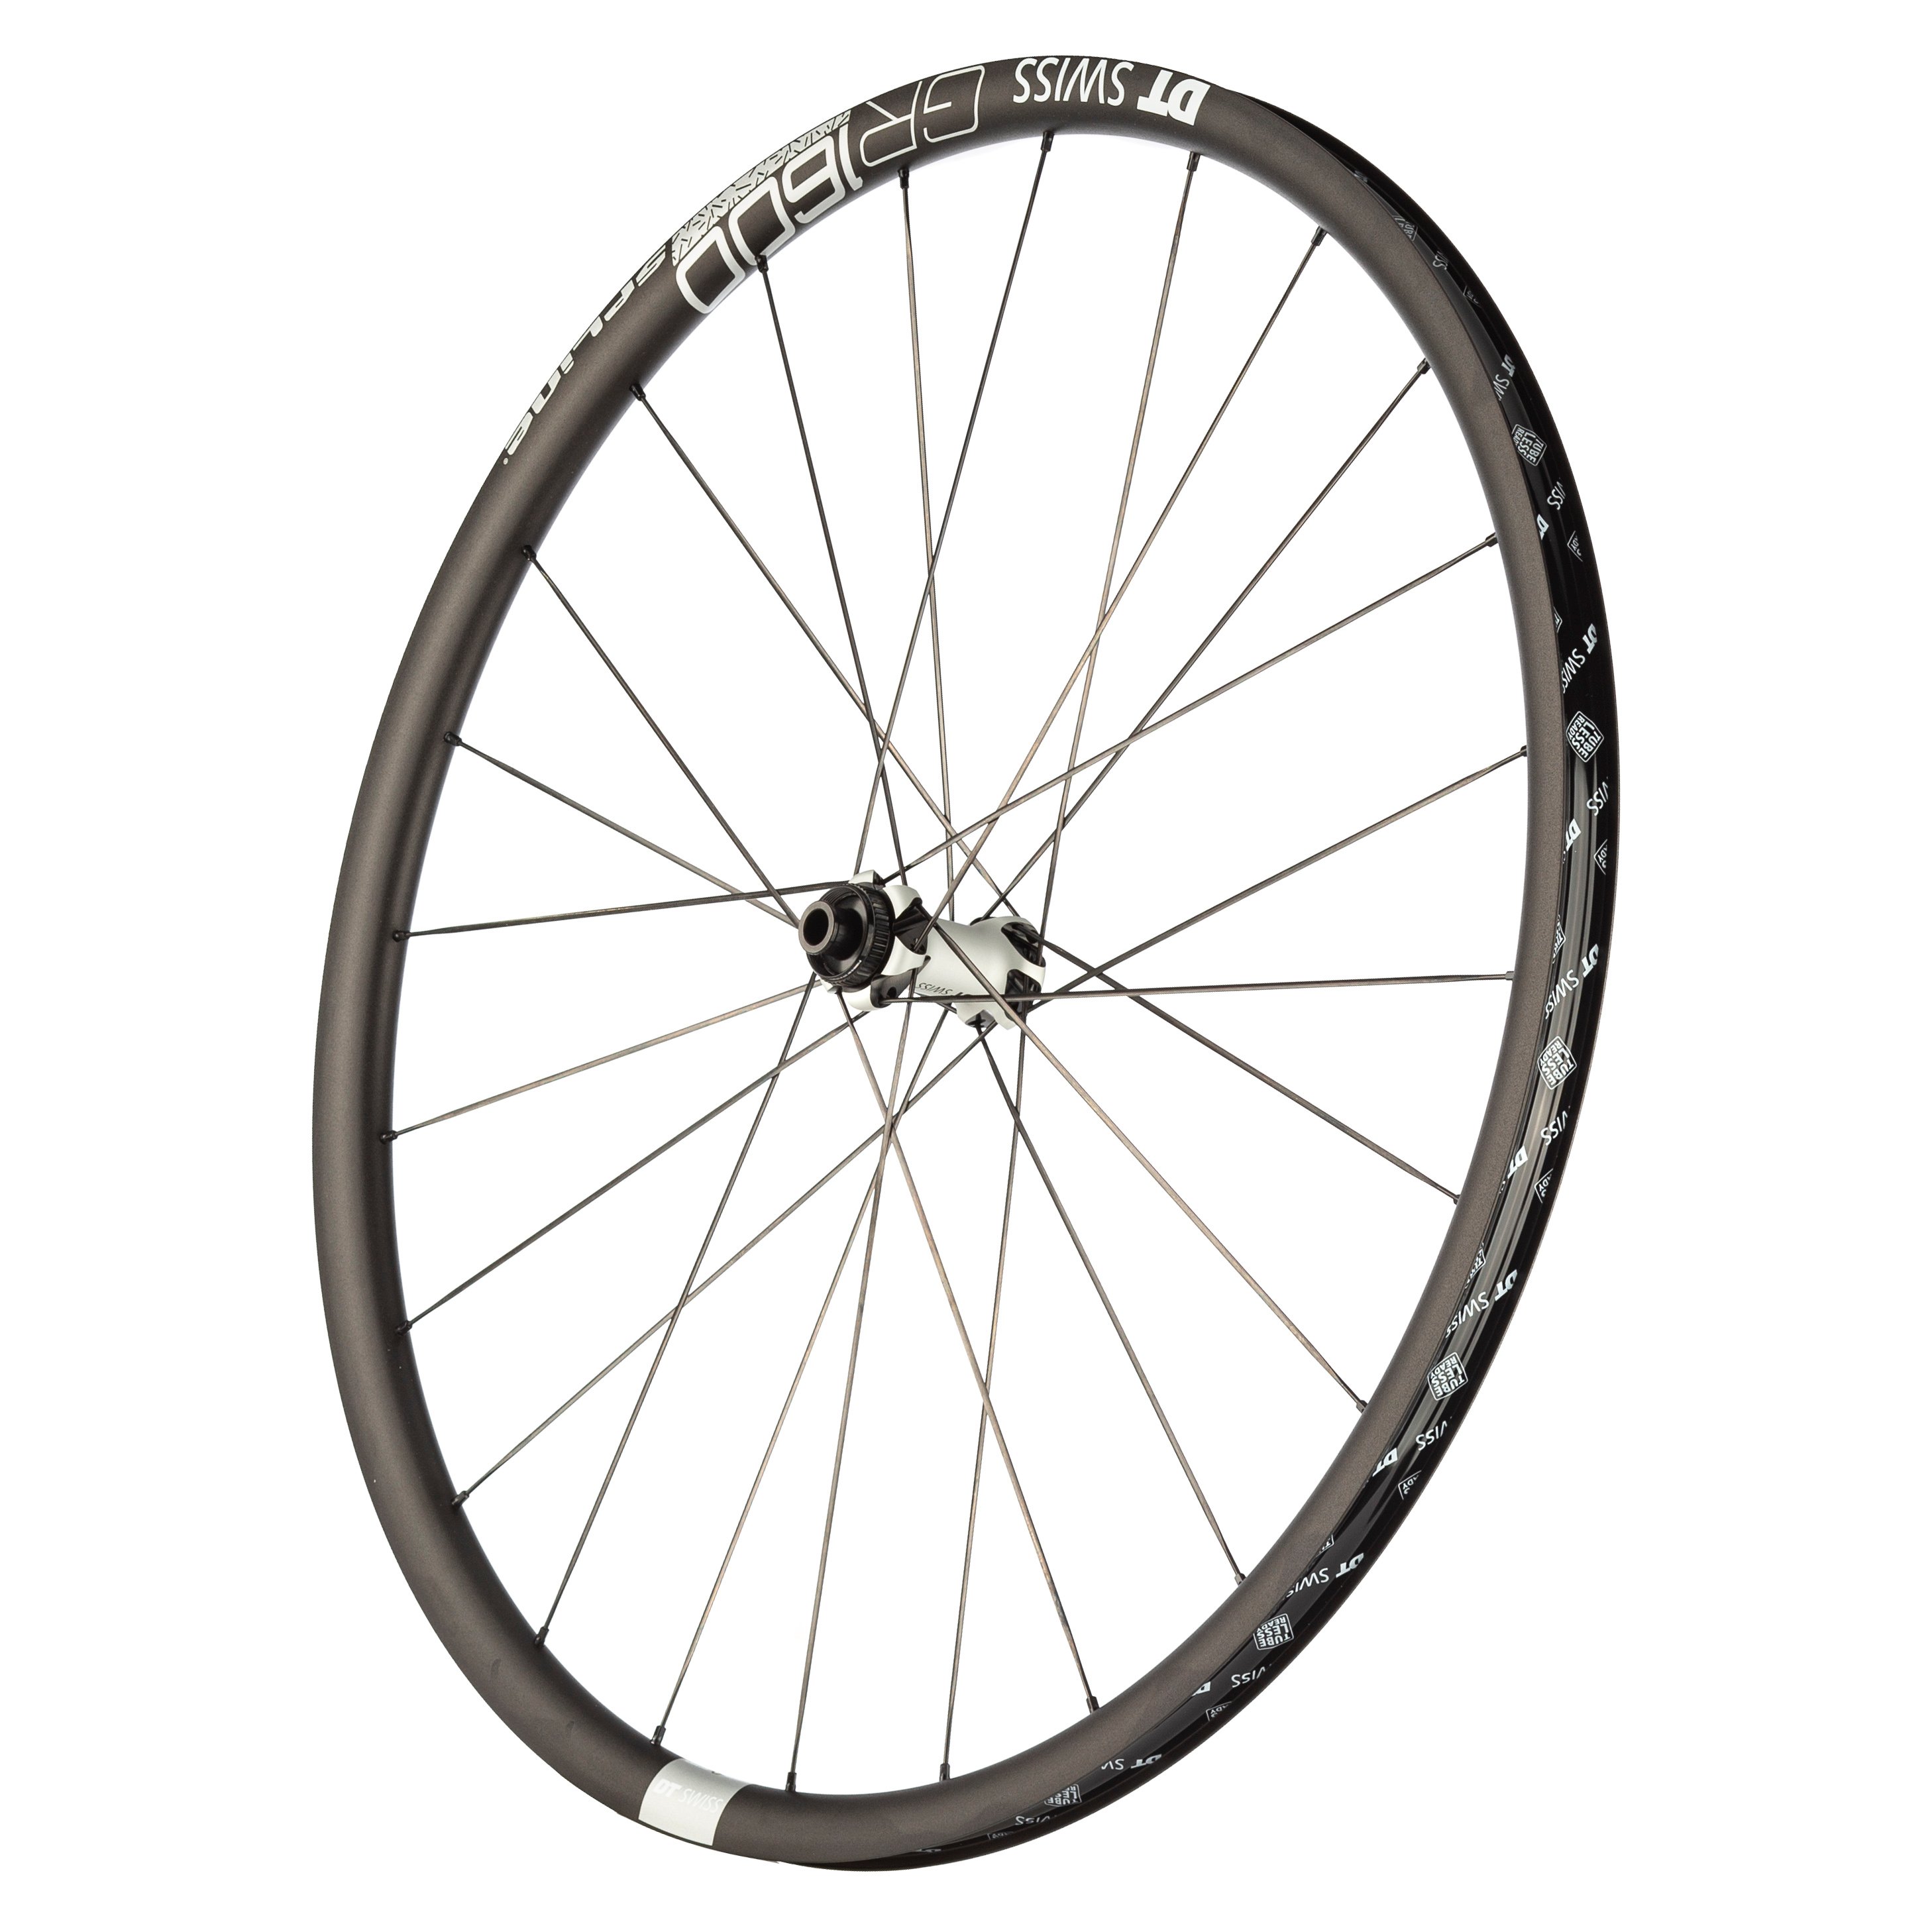 Details about   Velomax 700c Clincher Wheelset Road Bike Wheels Shimano/Sram 9 10 Speed 18/24h 